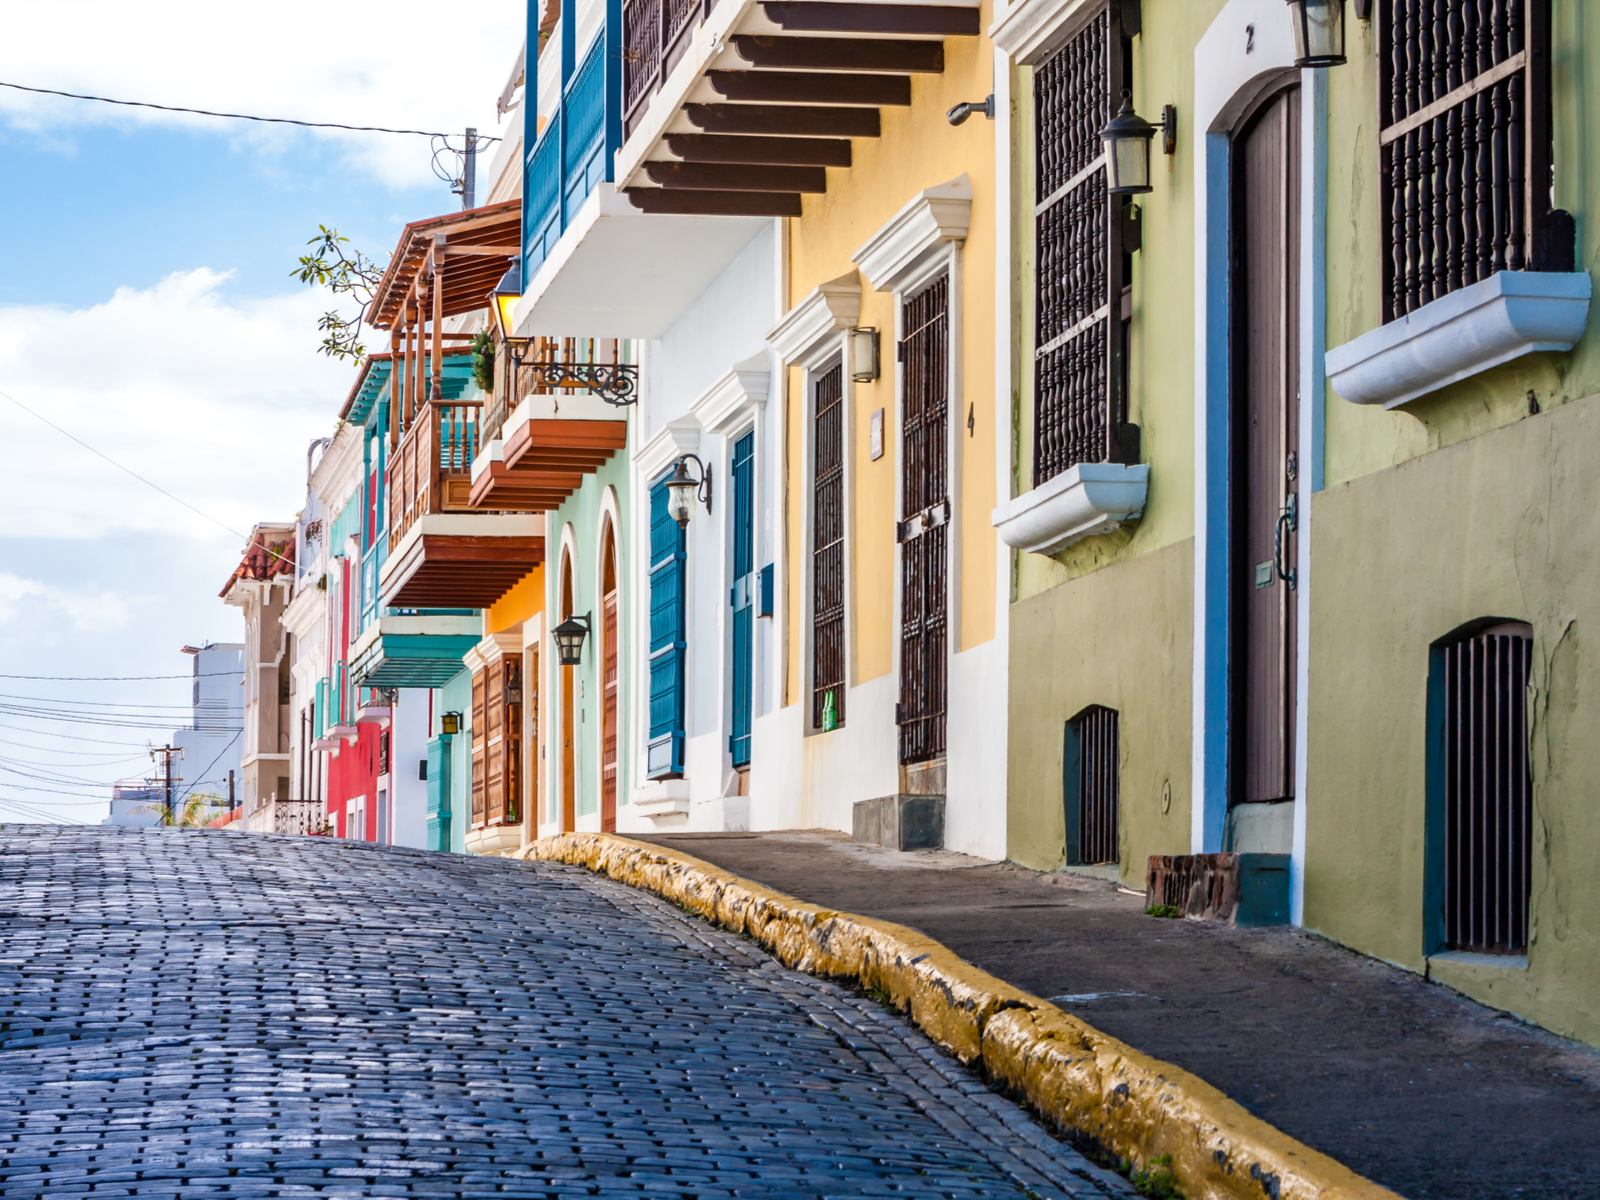 Several of the best hotels in Puerto Rico lining a brick street